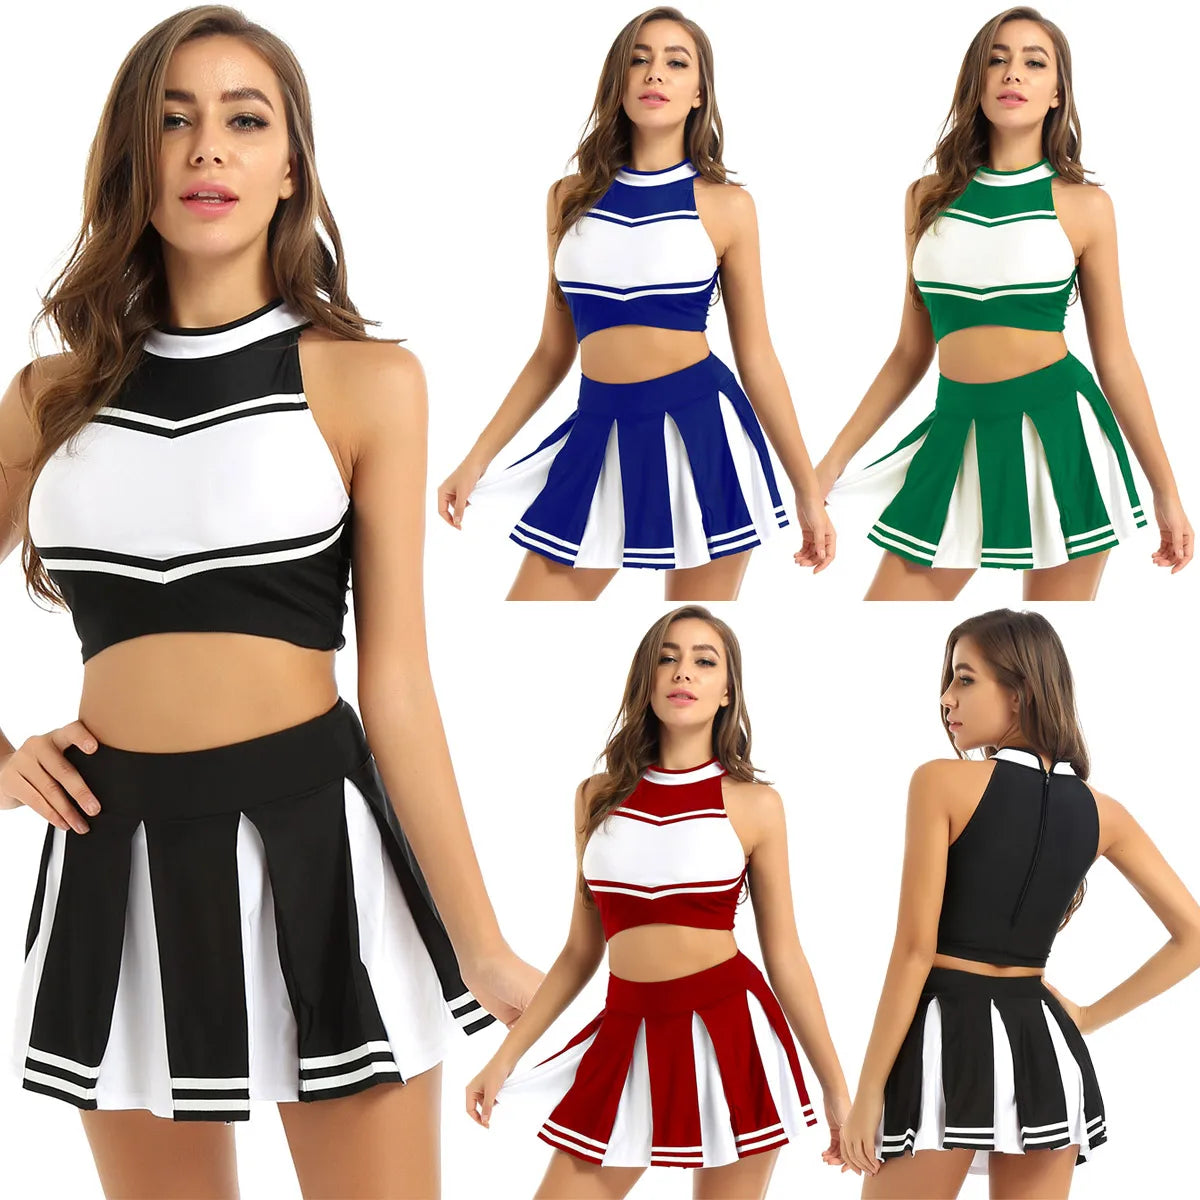 2 Piece Cheerleader Costume Women Adult Cheerleading Uniform Dancing Outfit Sleeveless Crop Top with Mini Pleated Skirt The Clothing Company Sydney